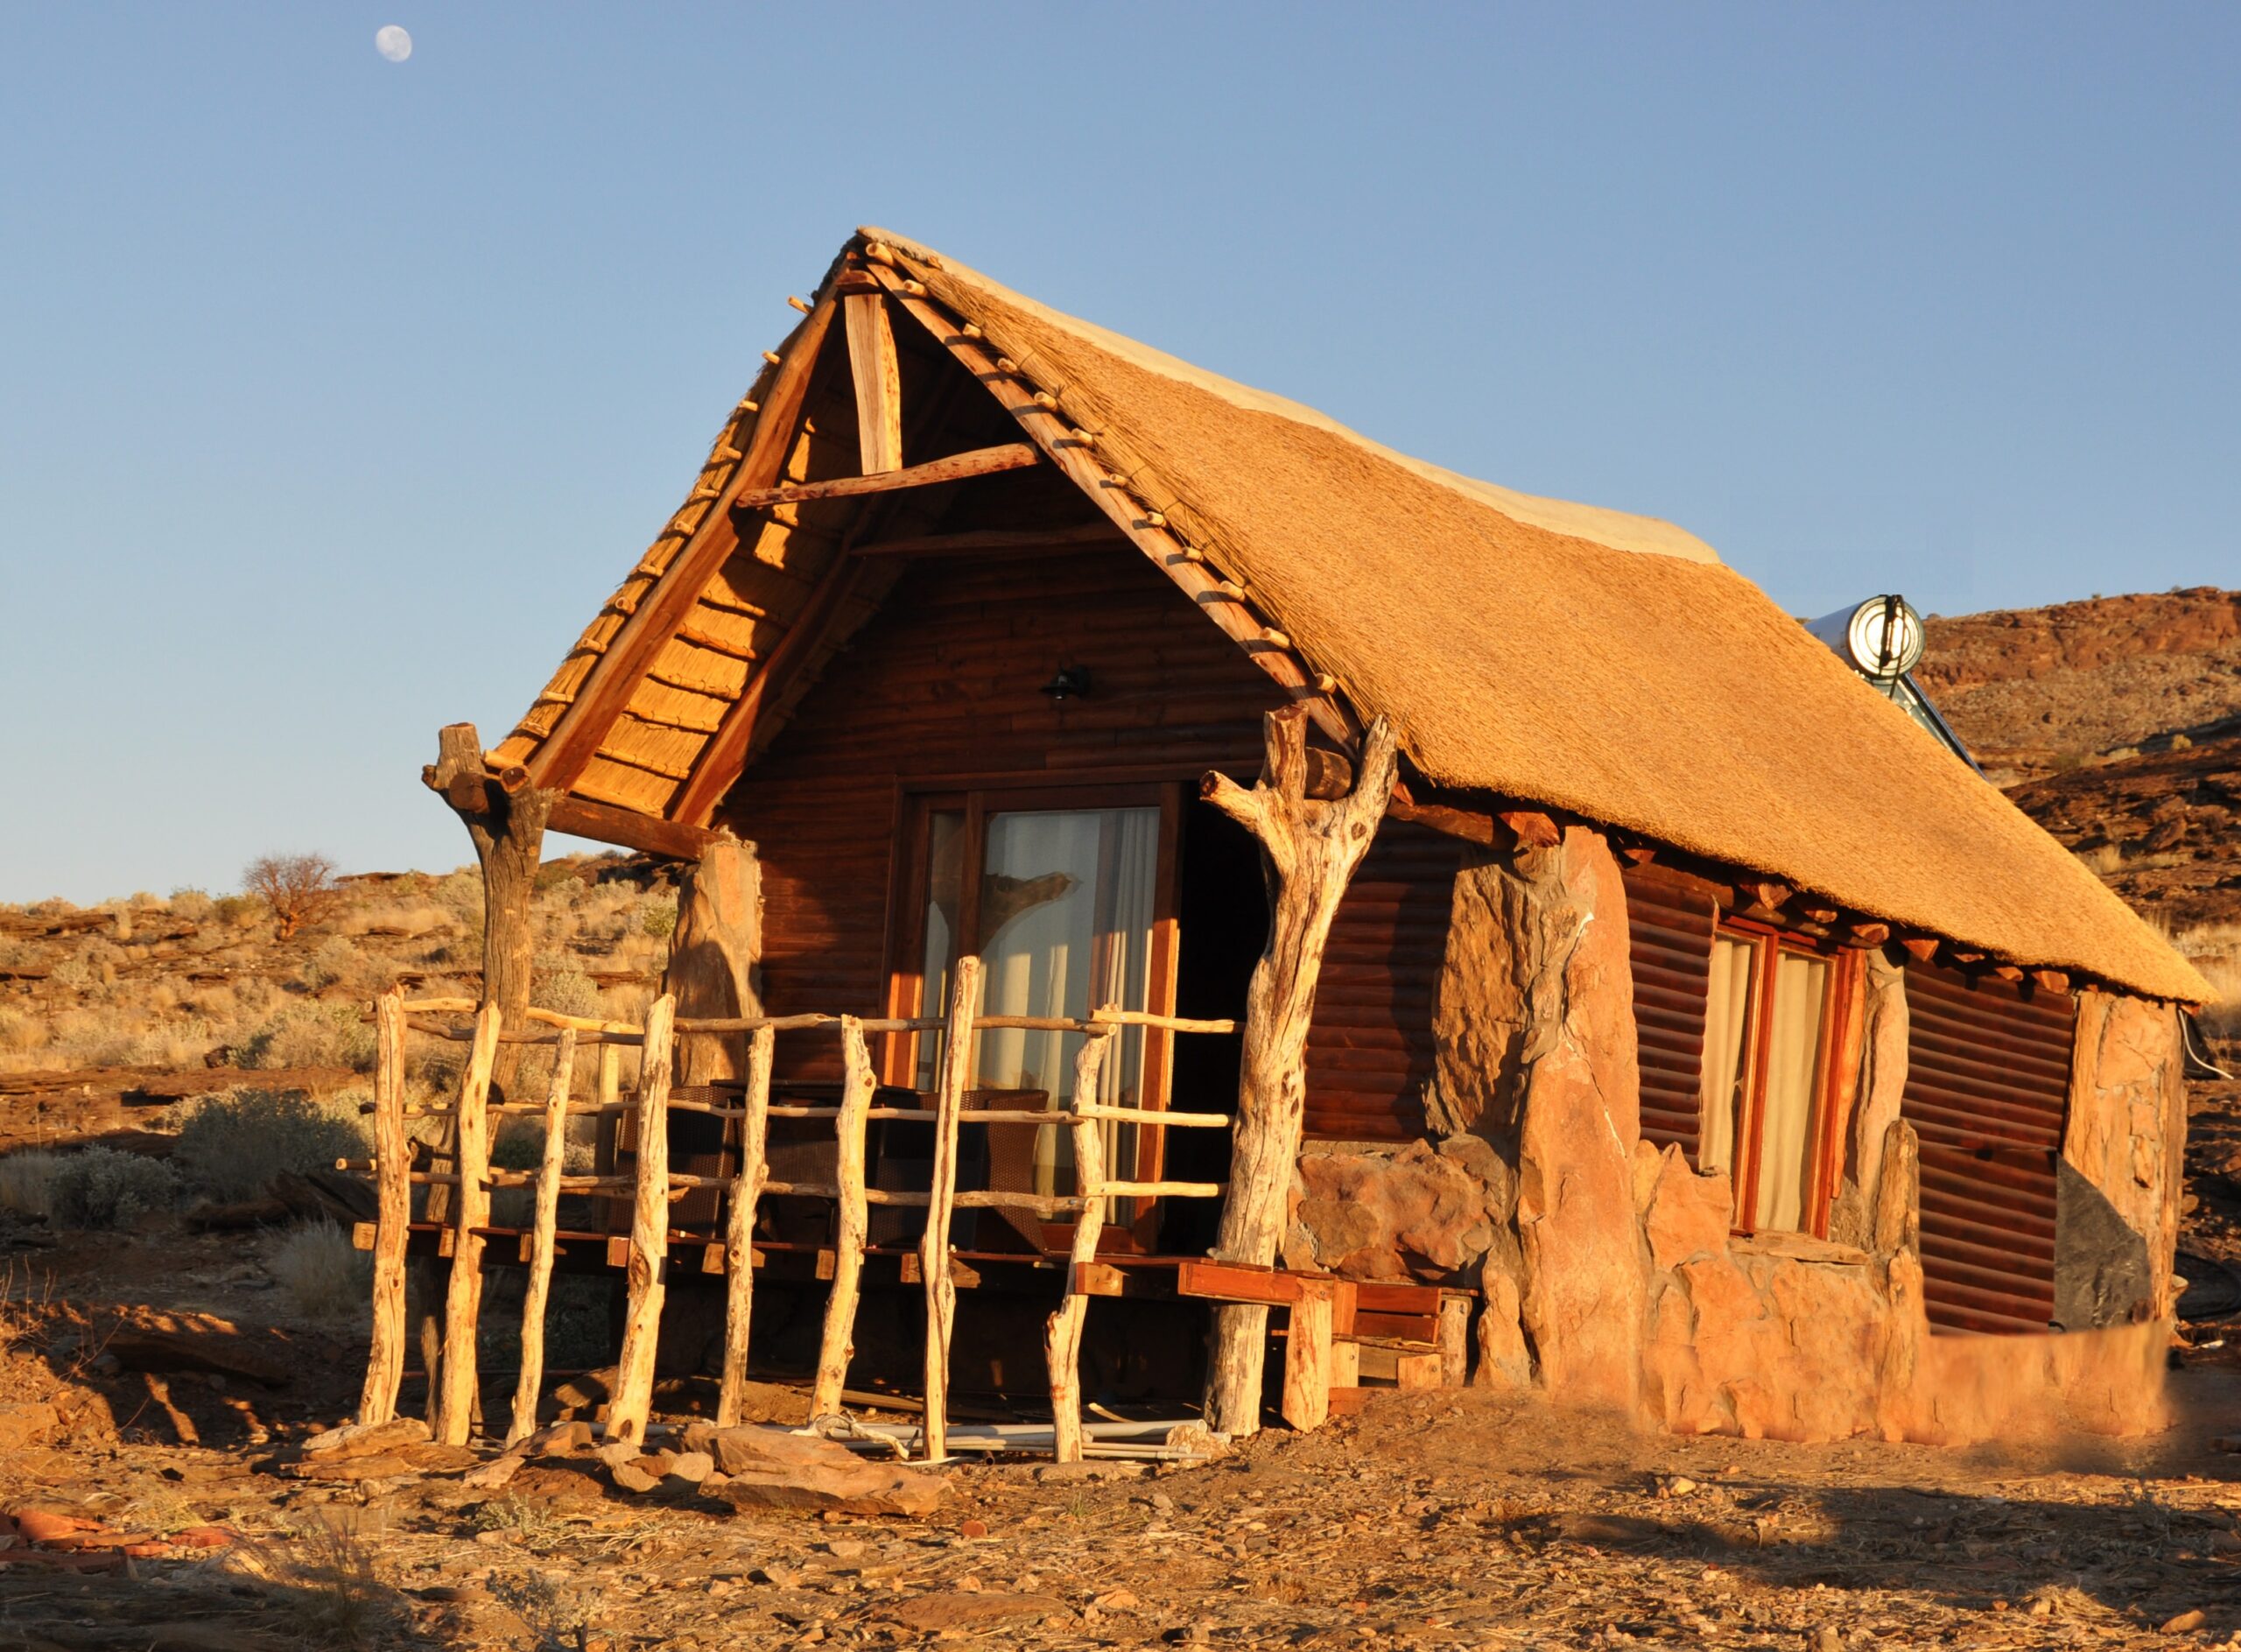 Namibia Valley Lodge